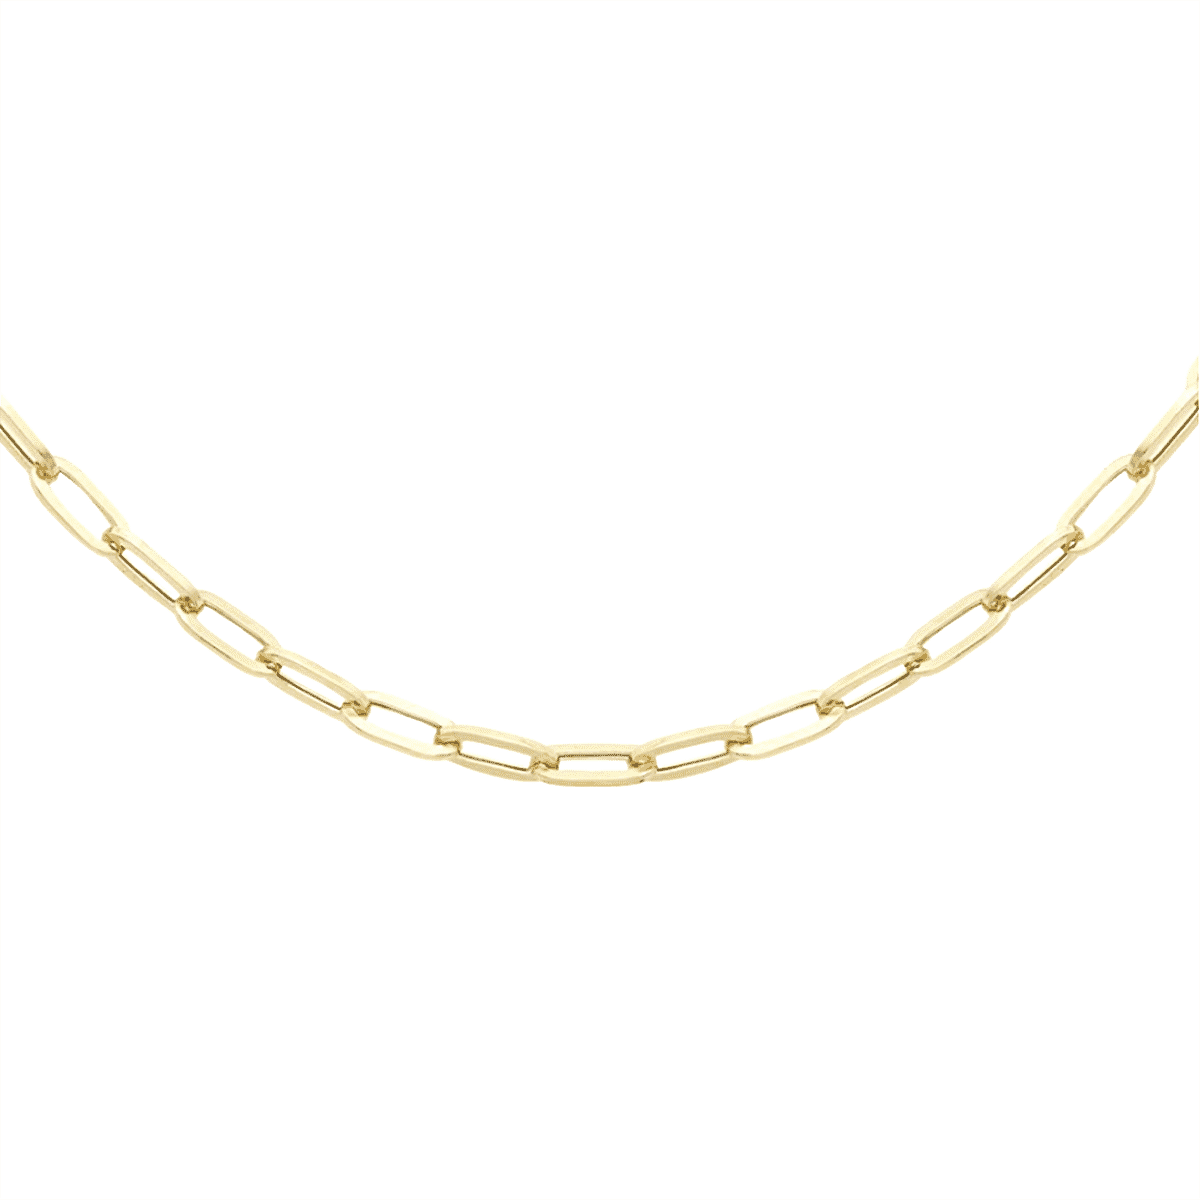 Hatton Garden Closeout - 9K Yellow Gold Paperclip Chain (Size - 20), Gold Wt. 5.2 Gms